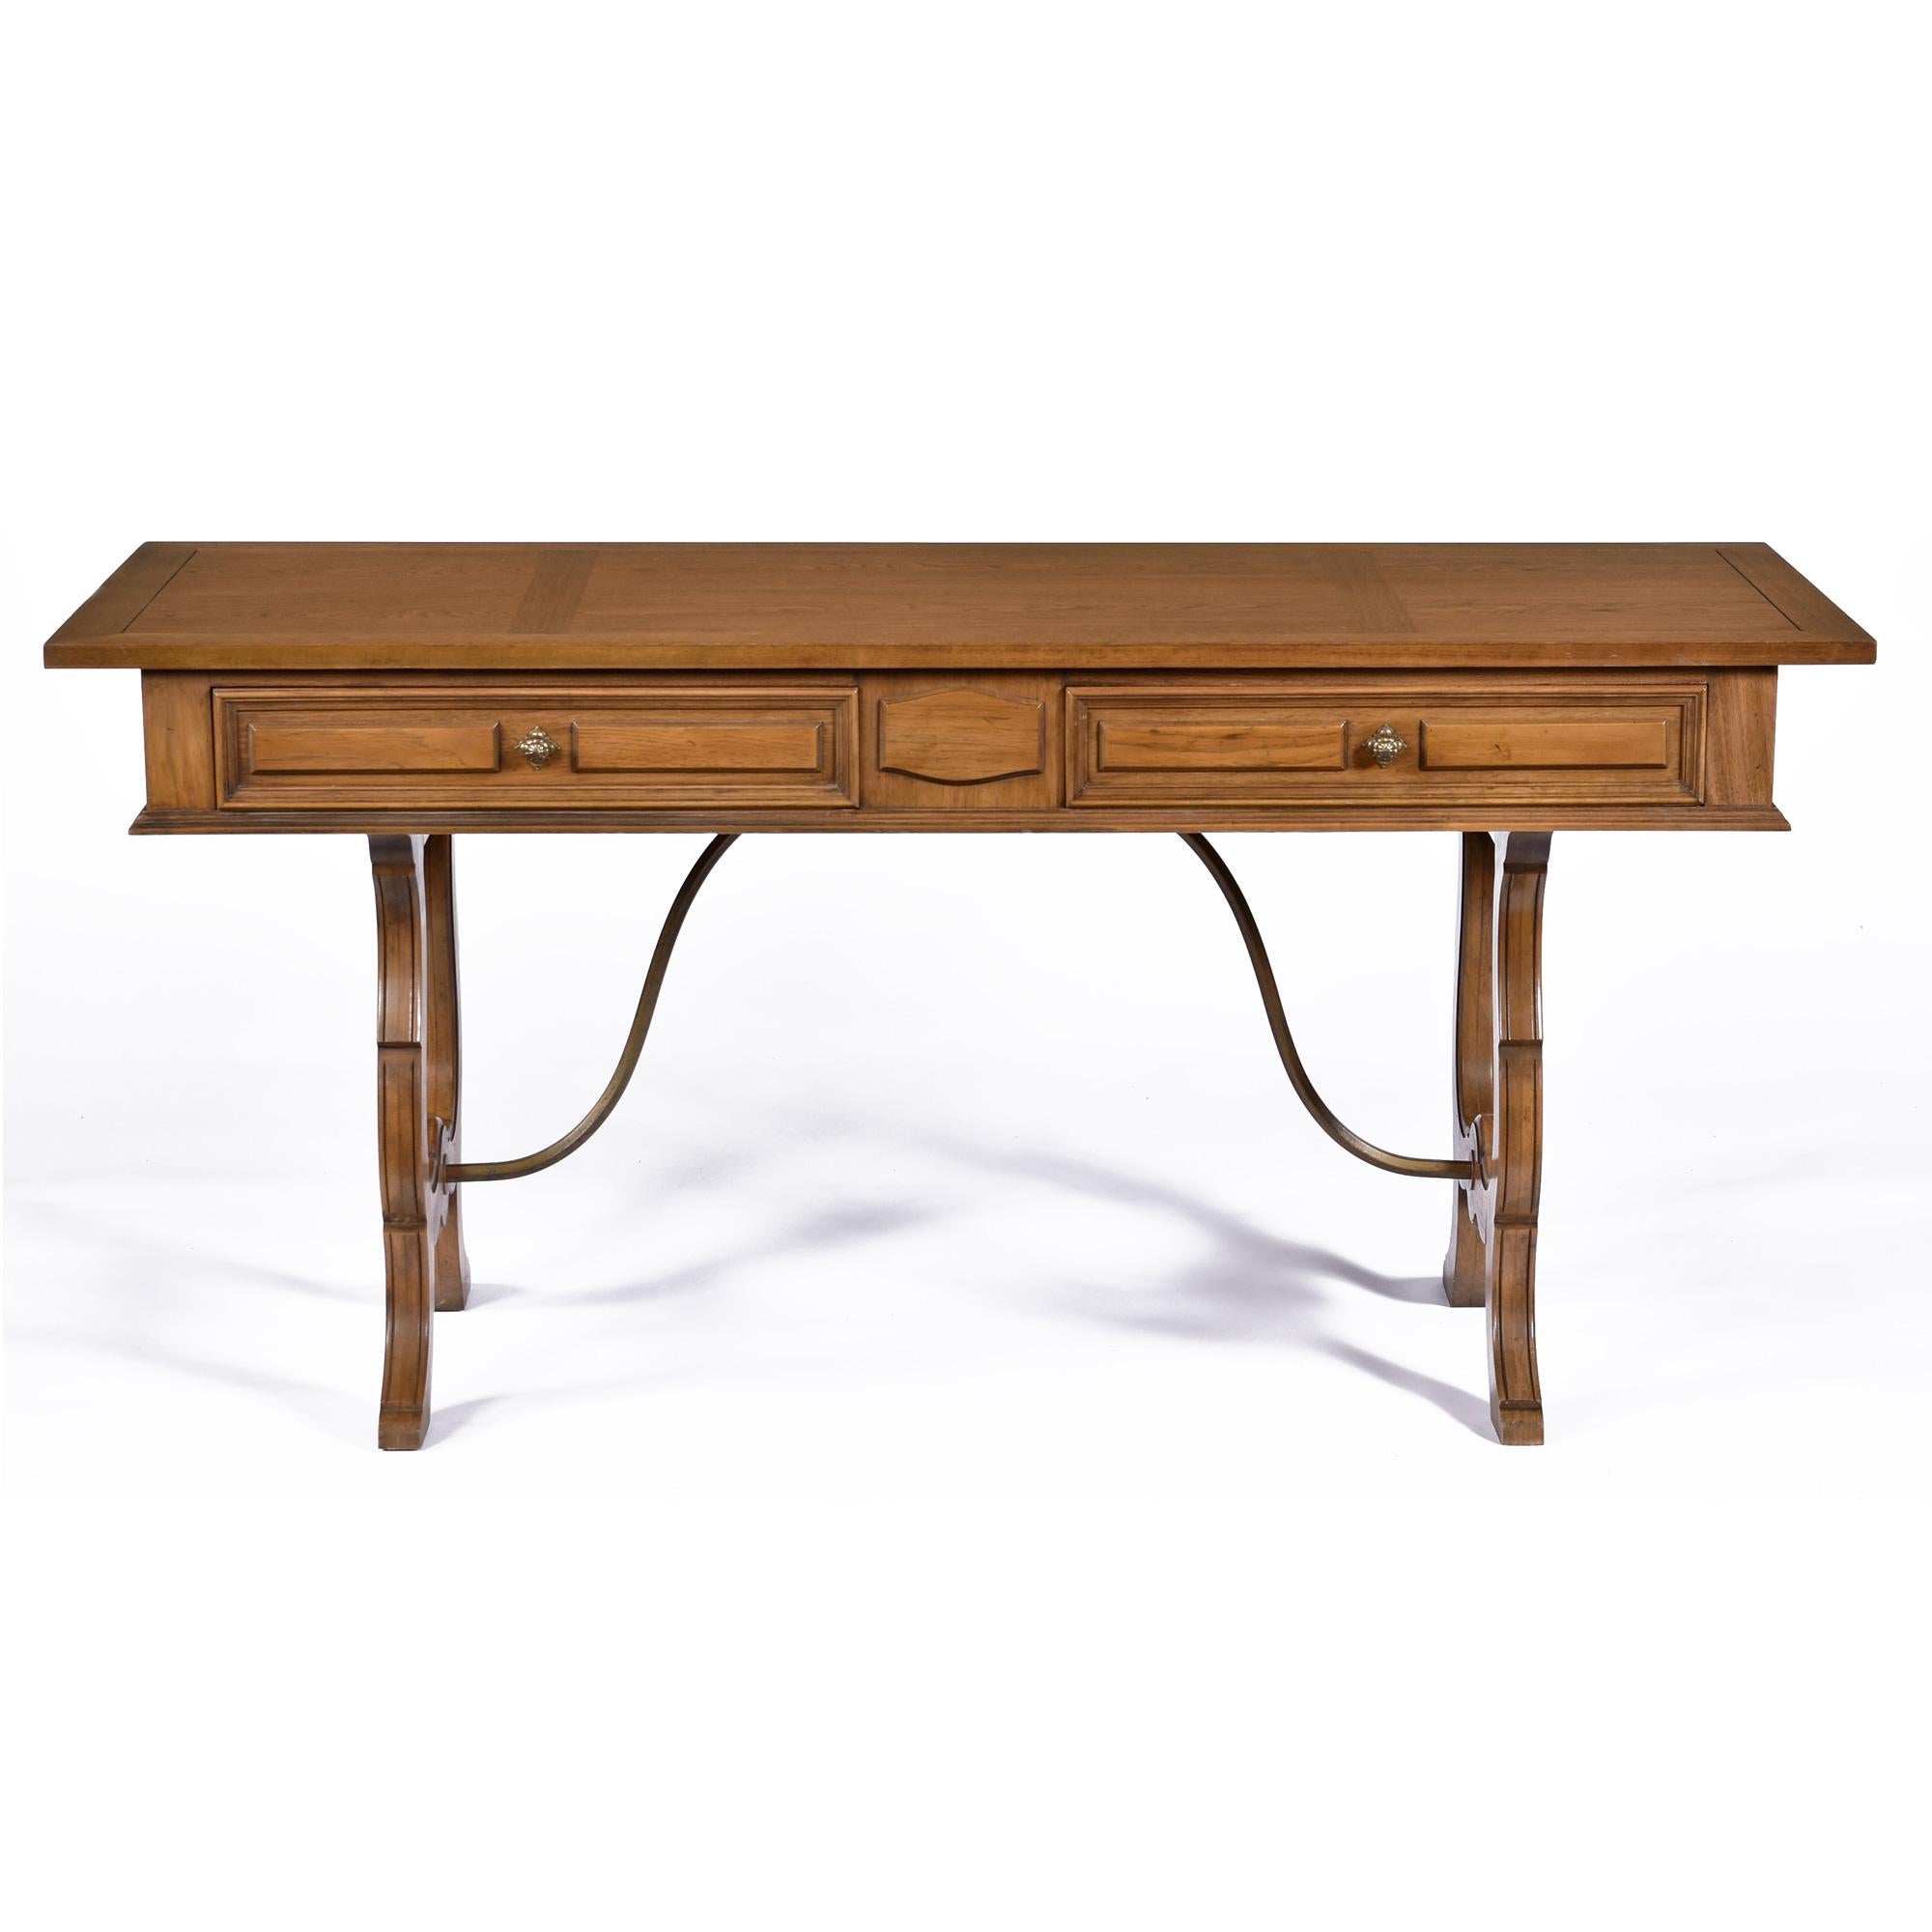 This English Regency style pecan writing desk by Thomasville would be perfect in any room.  Desk, console, or entryway table to name a few.  The stain / tone appears to be in the family of 